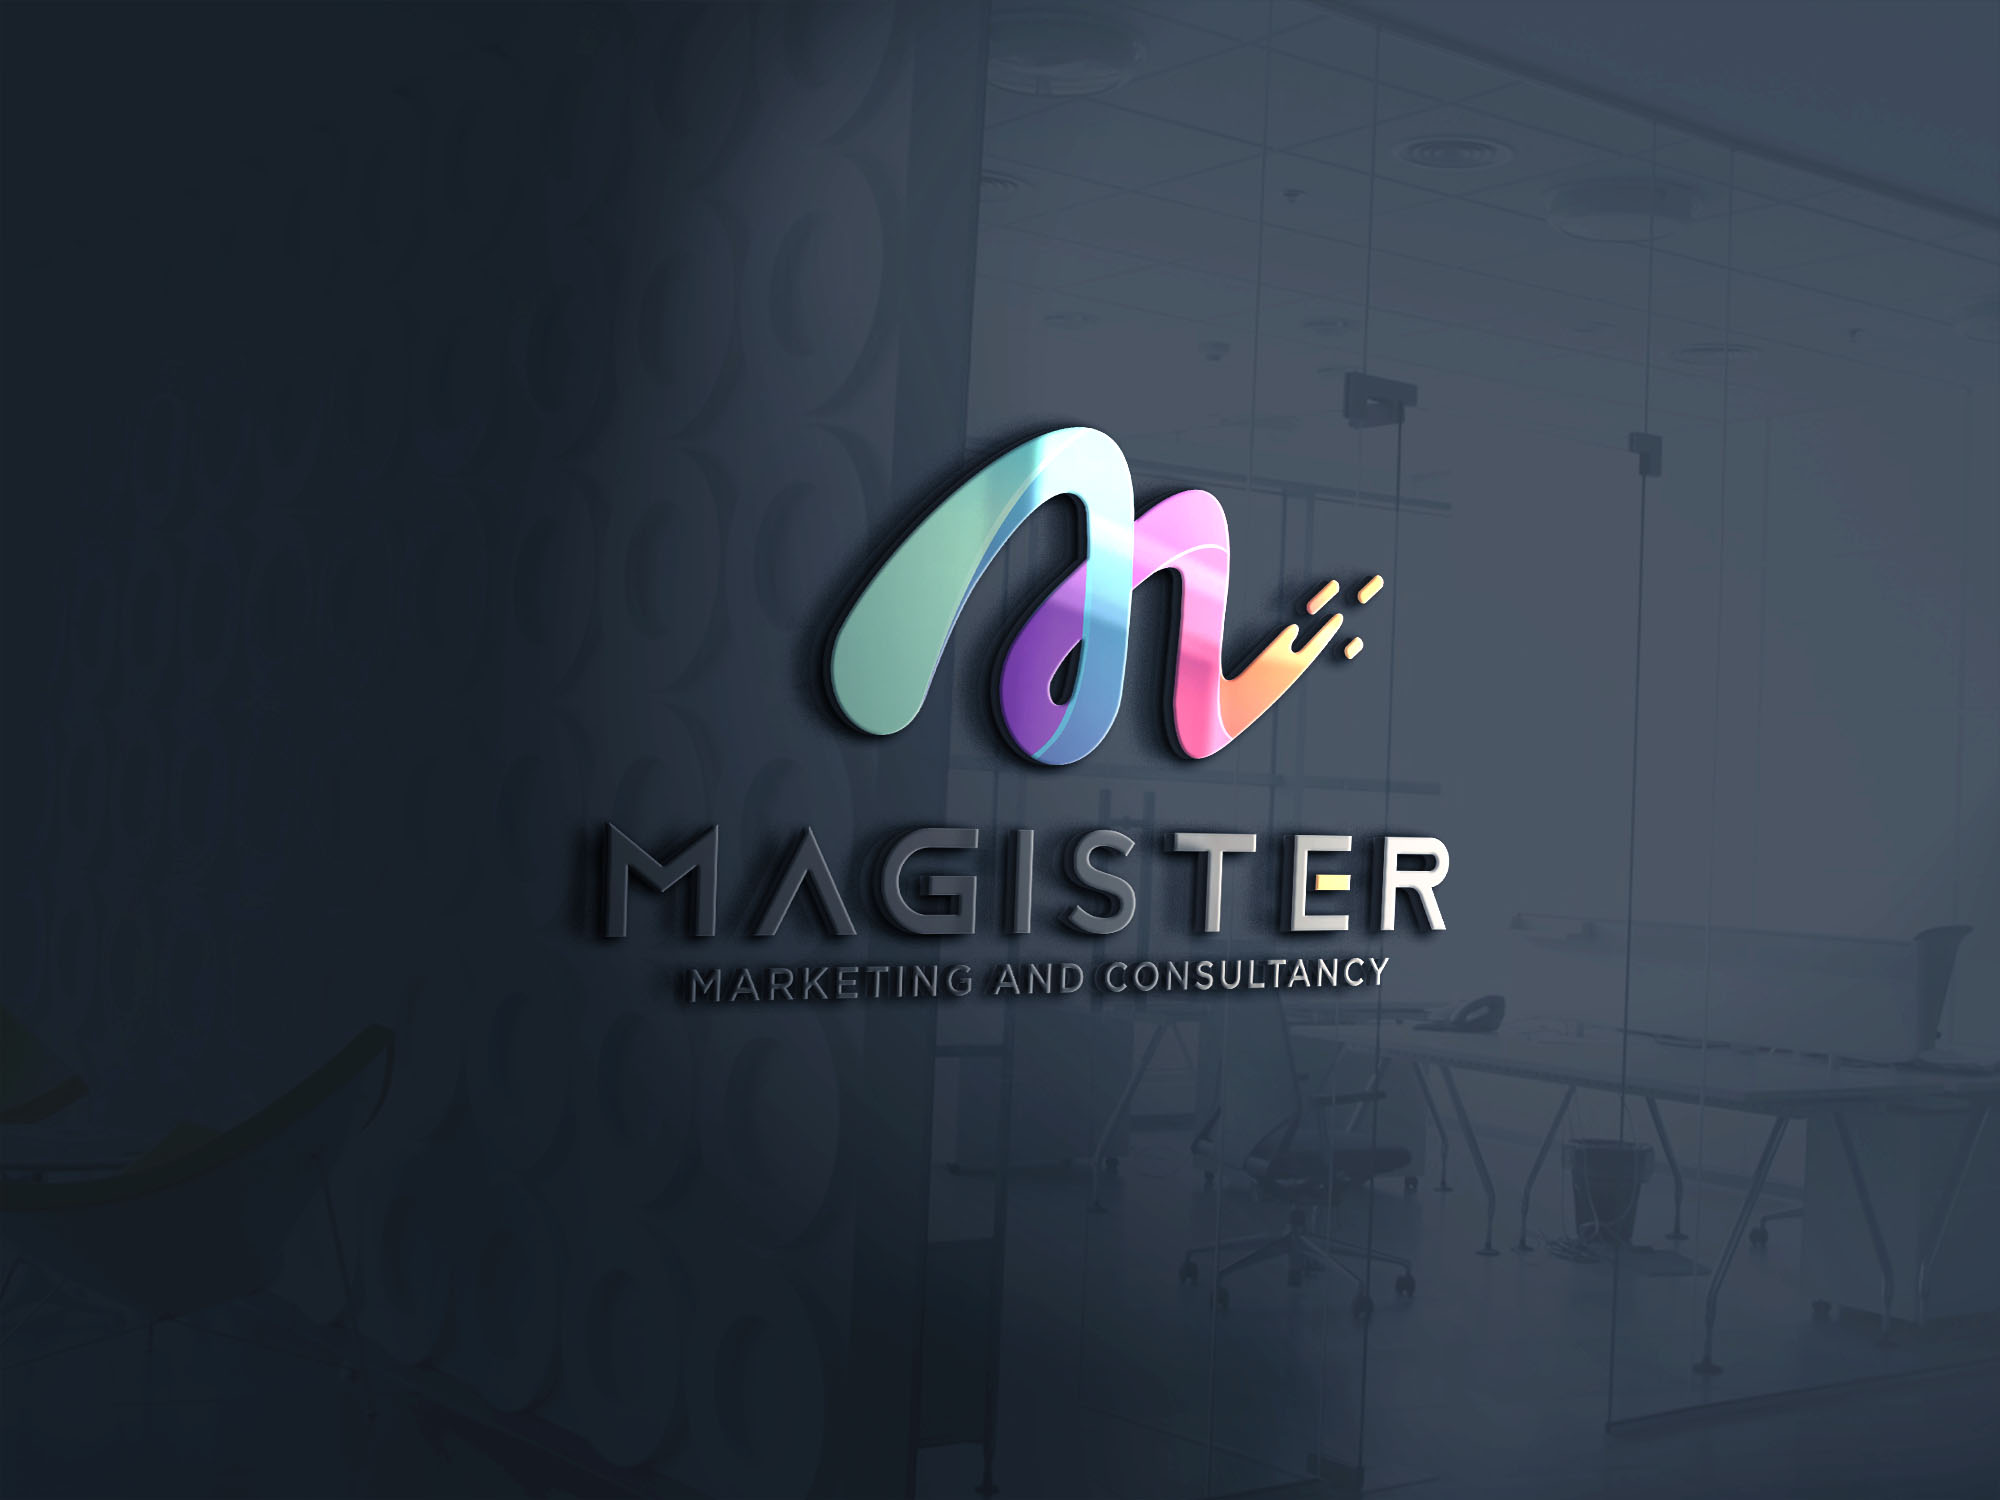 Magister Marketing and Consultancy